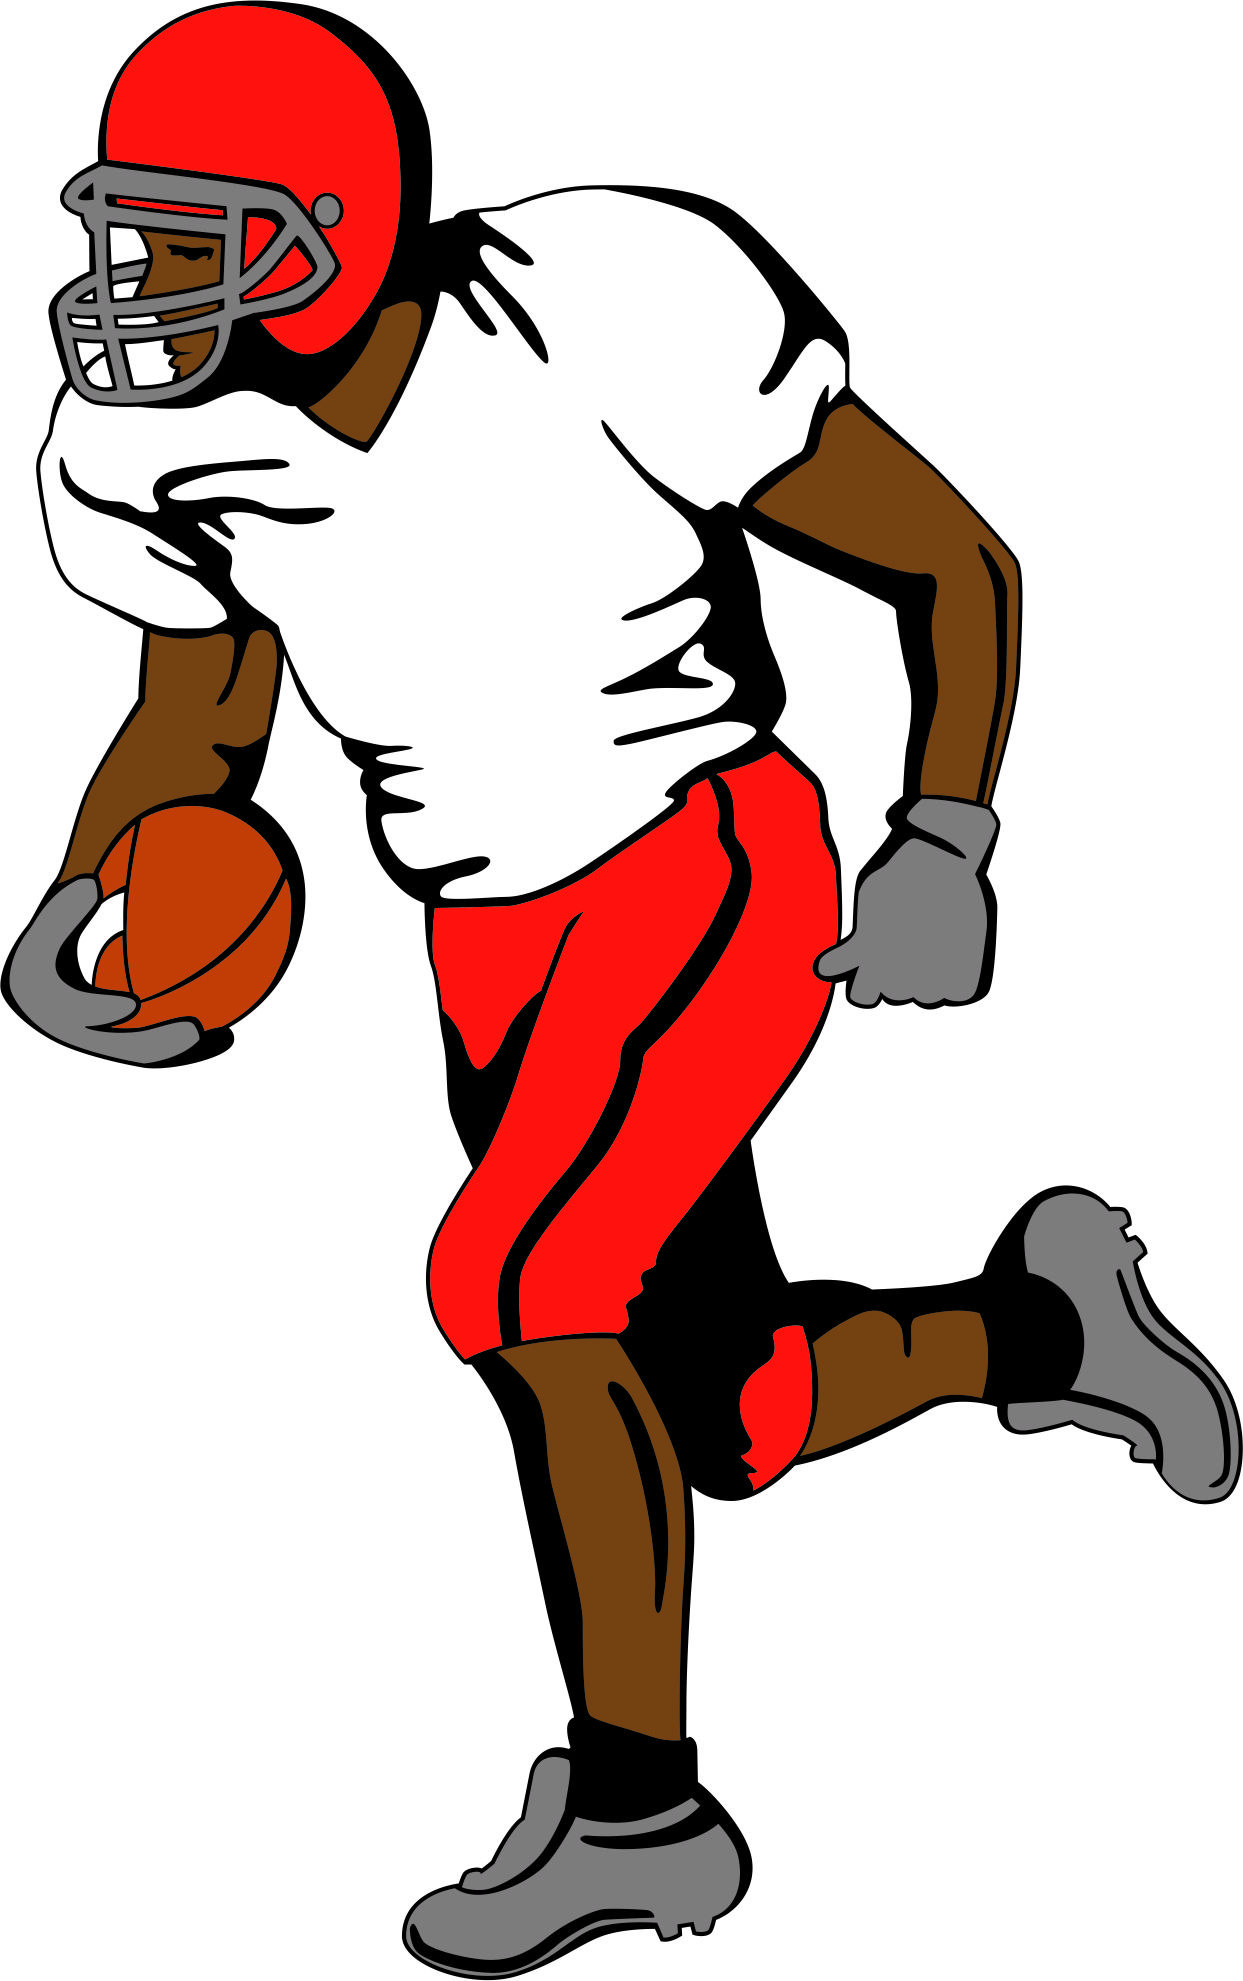 moving football clipart - photo #40